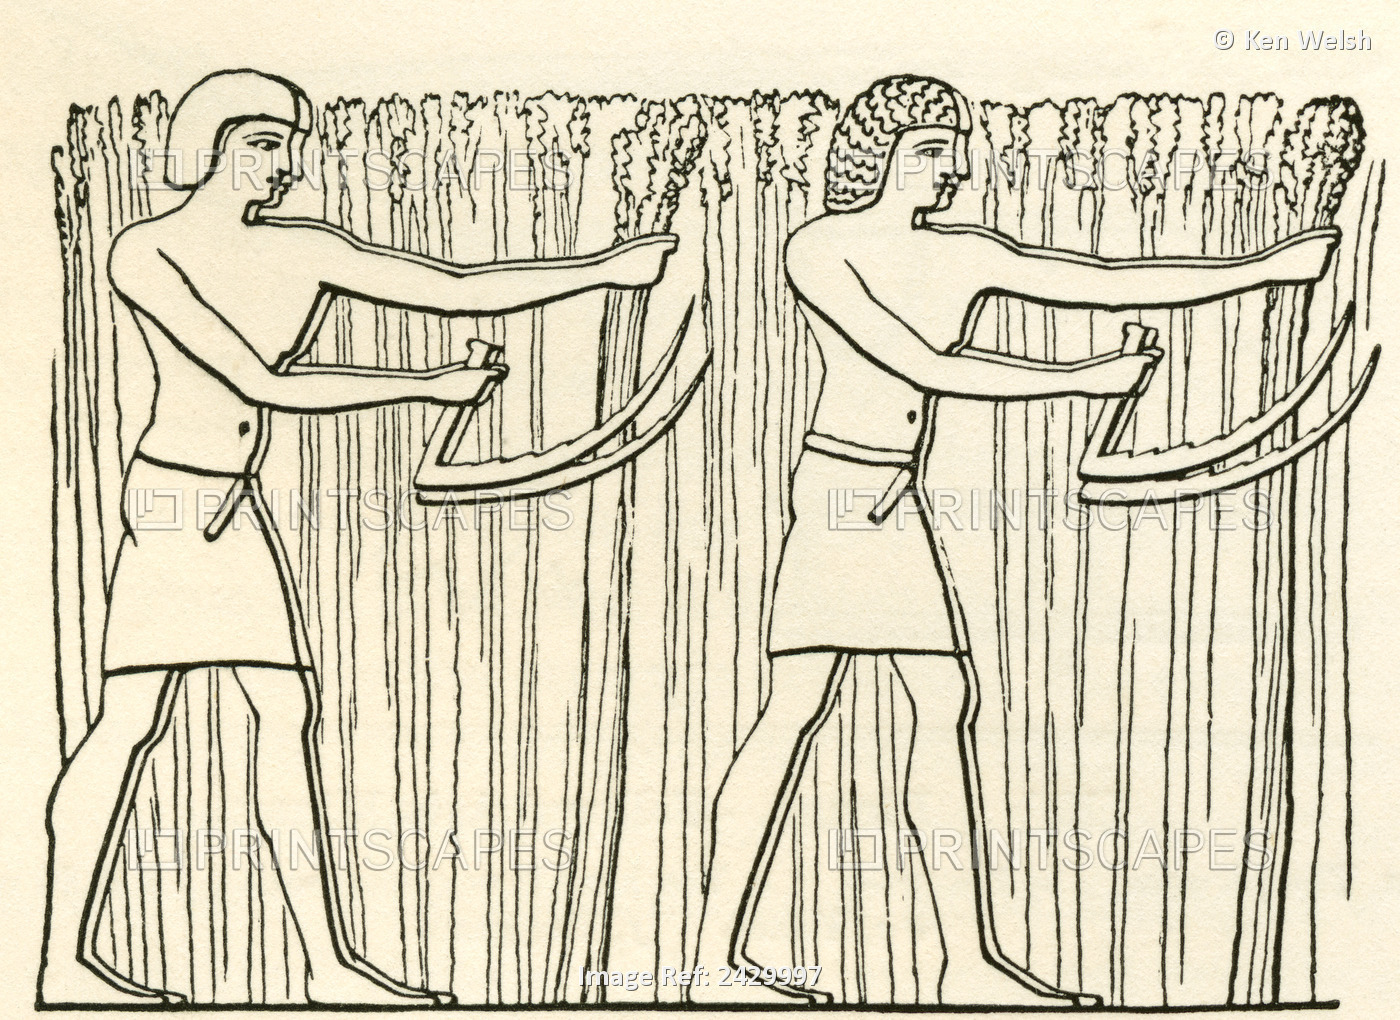 Reaping In Ancient Egypt. From The Imperial Bible Dictionary, Published 1889.